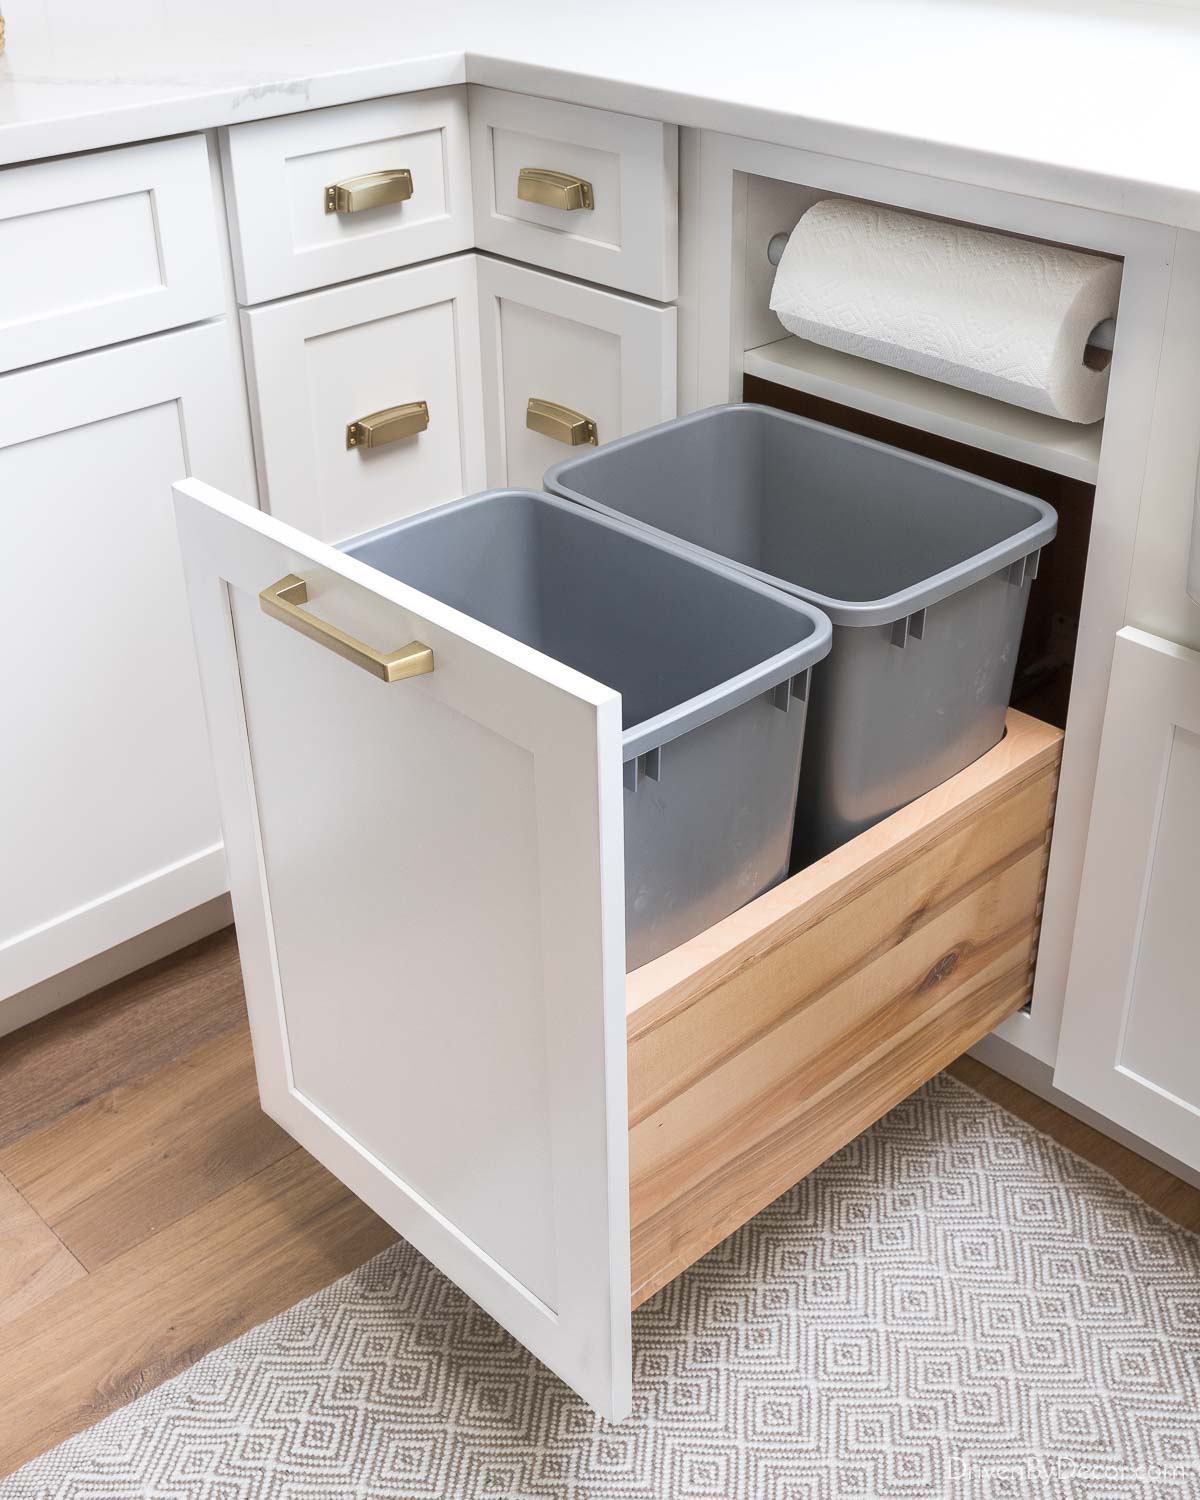 Double pull out trash can cabinet - kitchen organization ideas